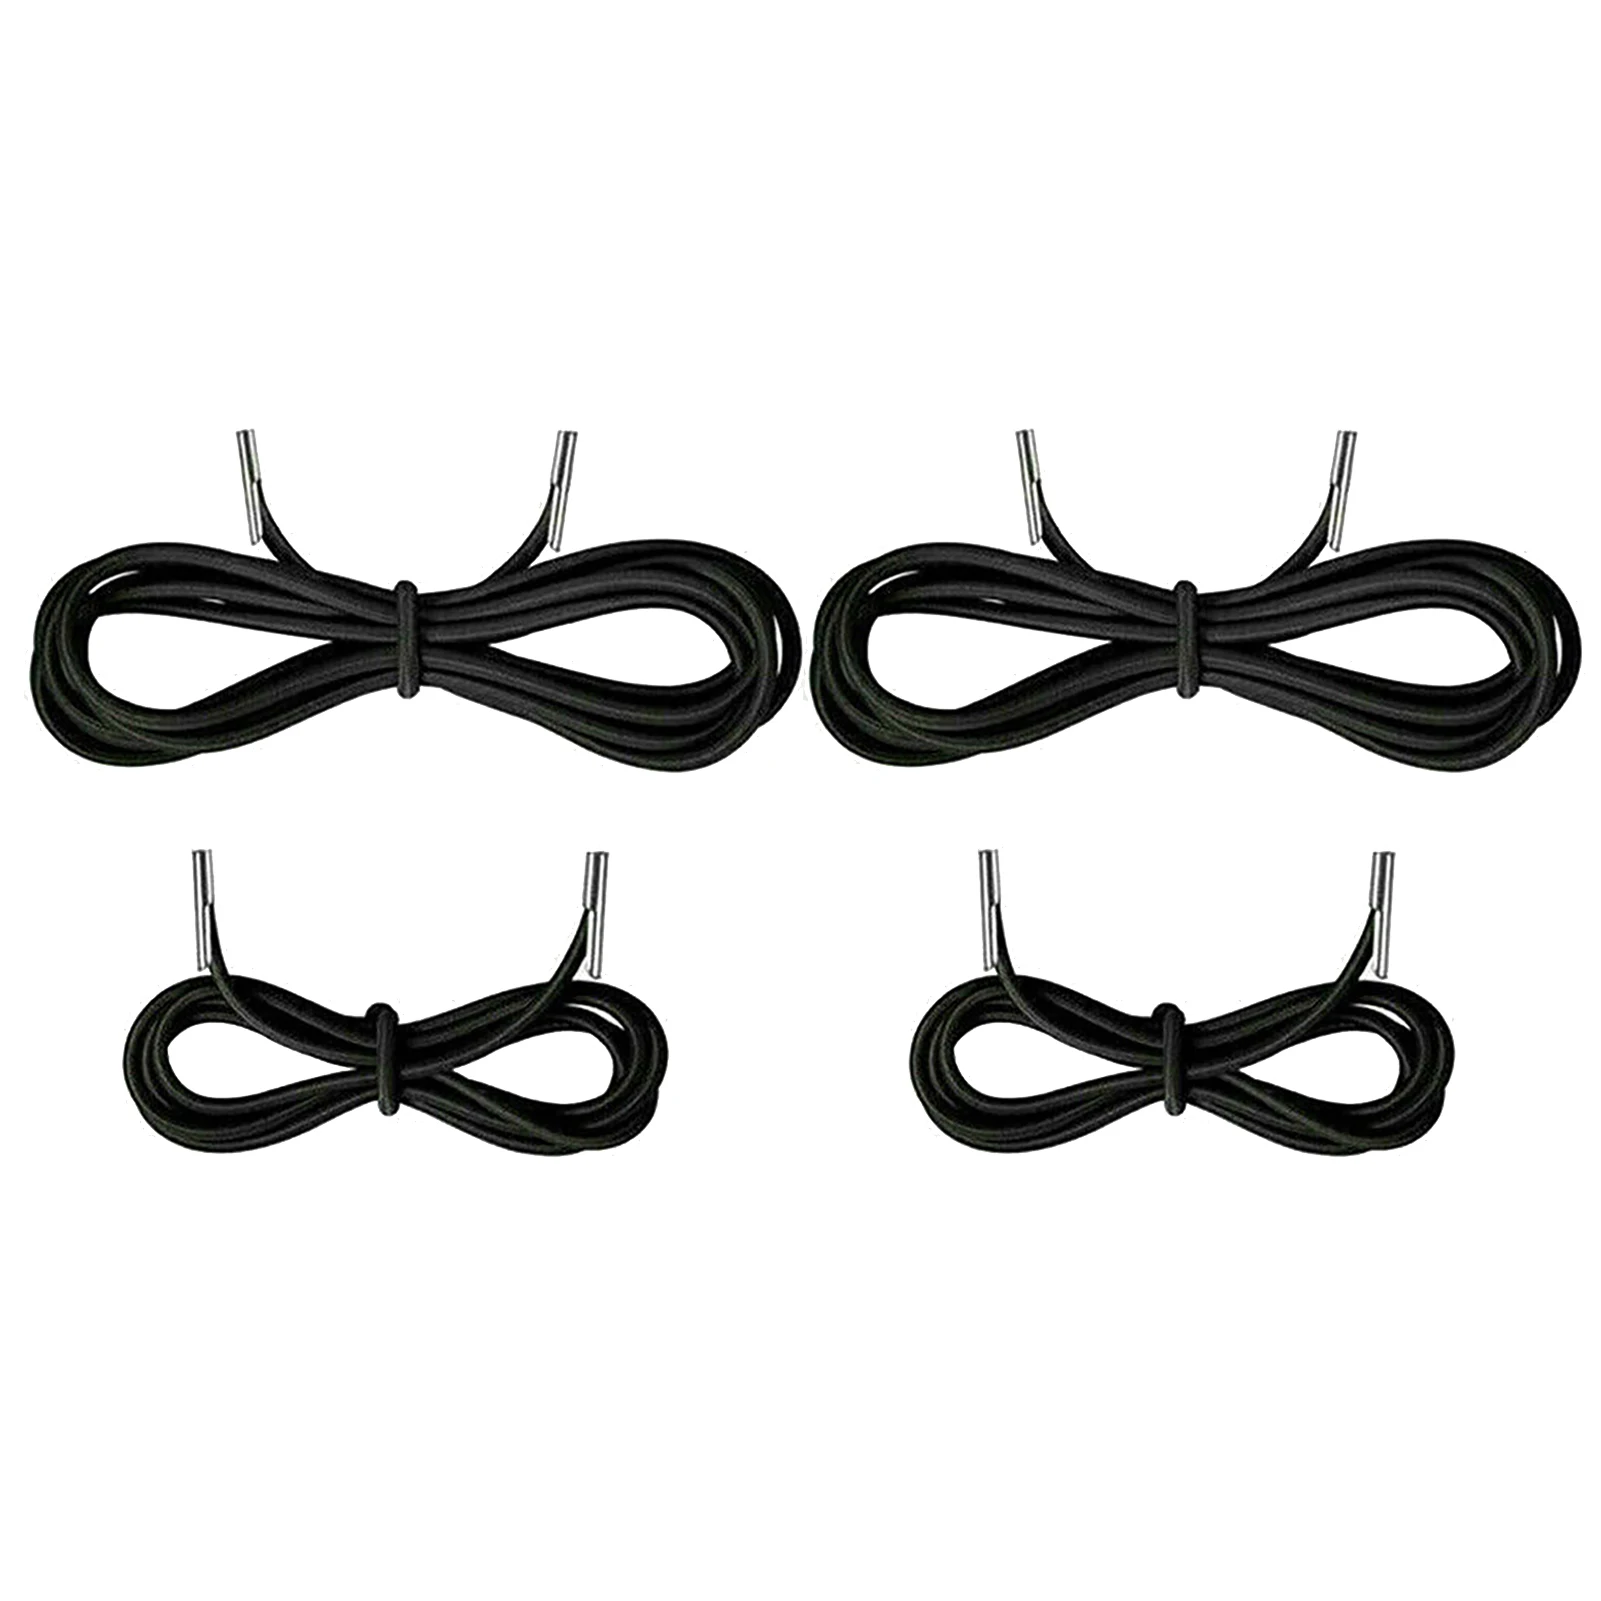 Hair replacement laces for antigravity chair universal replacement bungee laces elastic thumb200